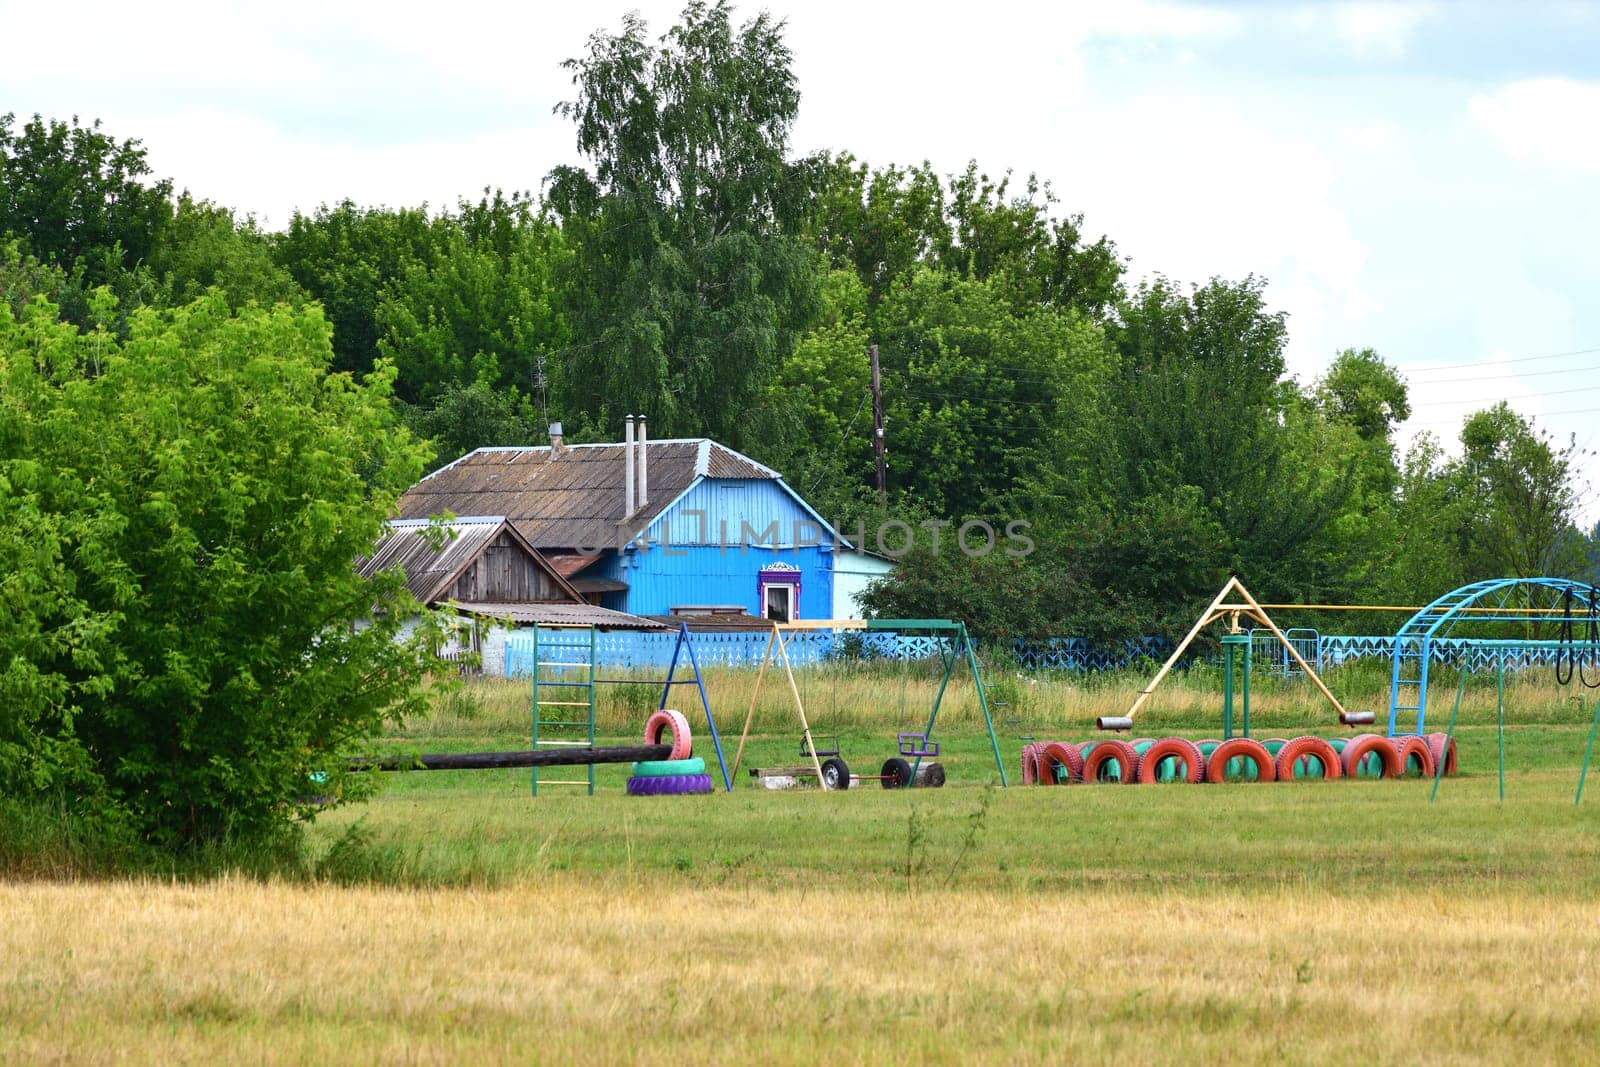 Rural house with a homemade children's playground made from tires, Russia by olgavolodina